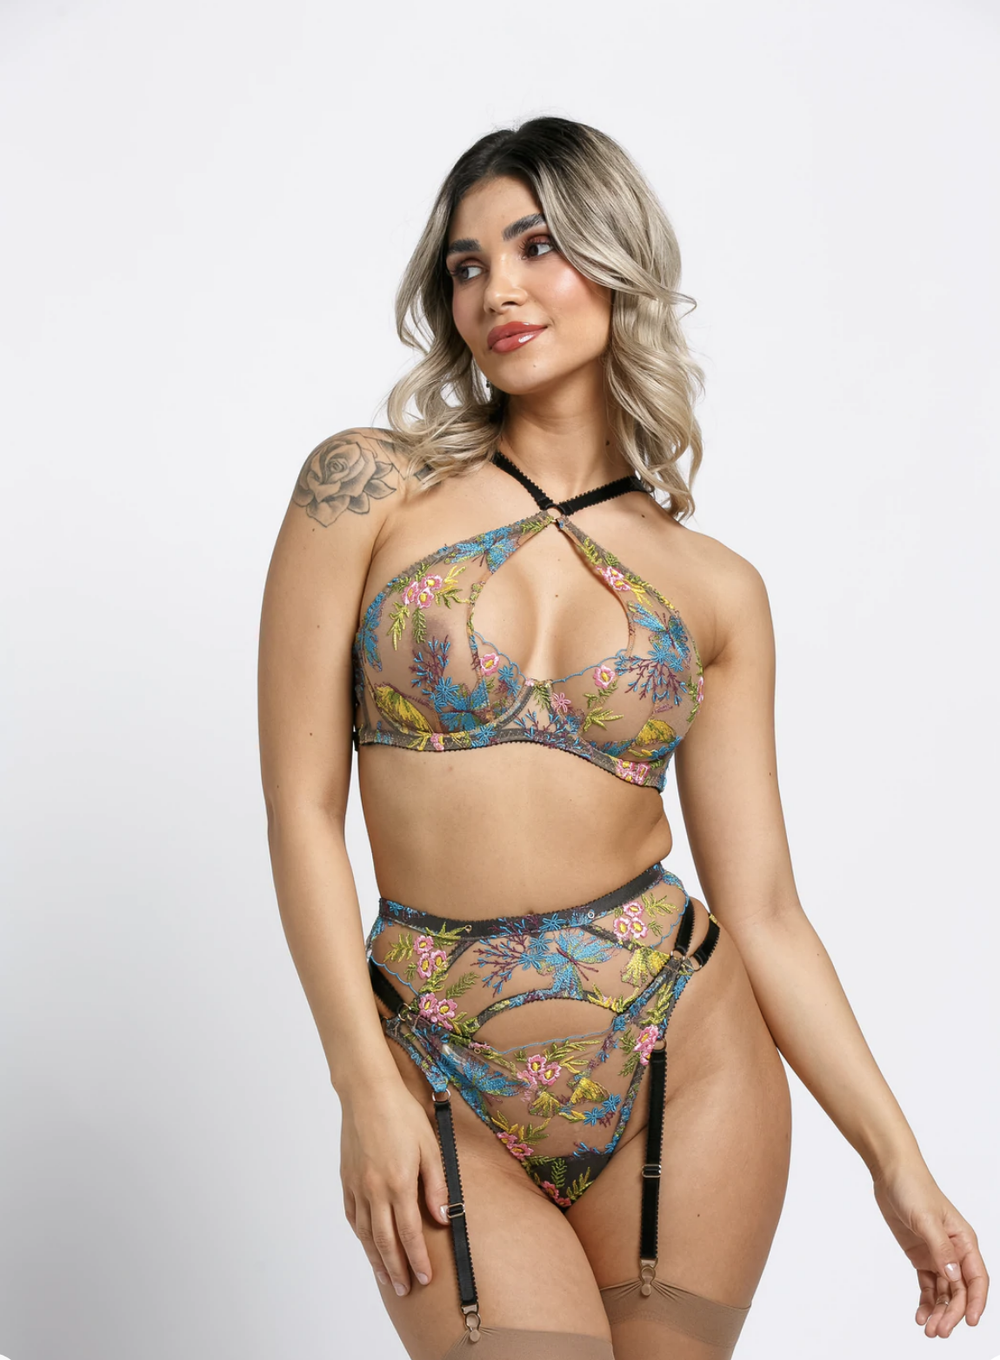 Here are 4 Lingerie brands that are perfect for your boudoir session!